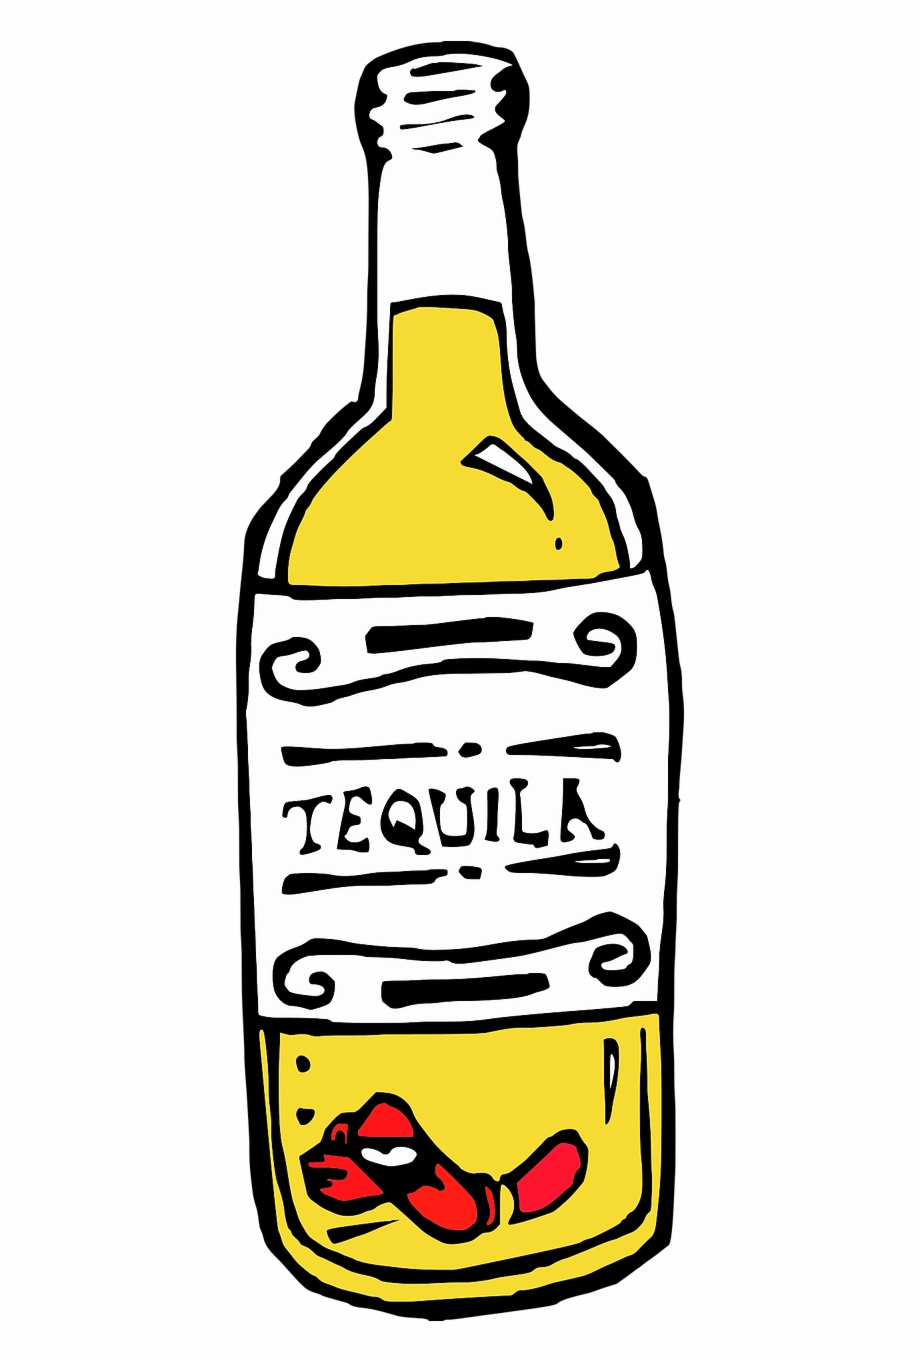 Tequila Drink Alcohol Transparent Png Image Tequila Clipart. tequila png. 